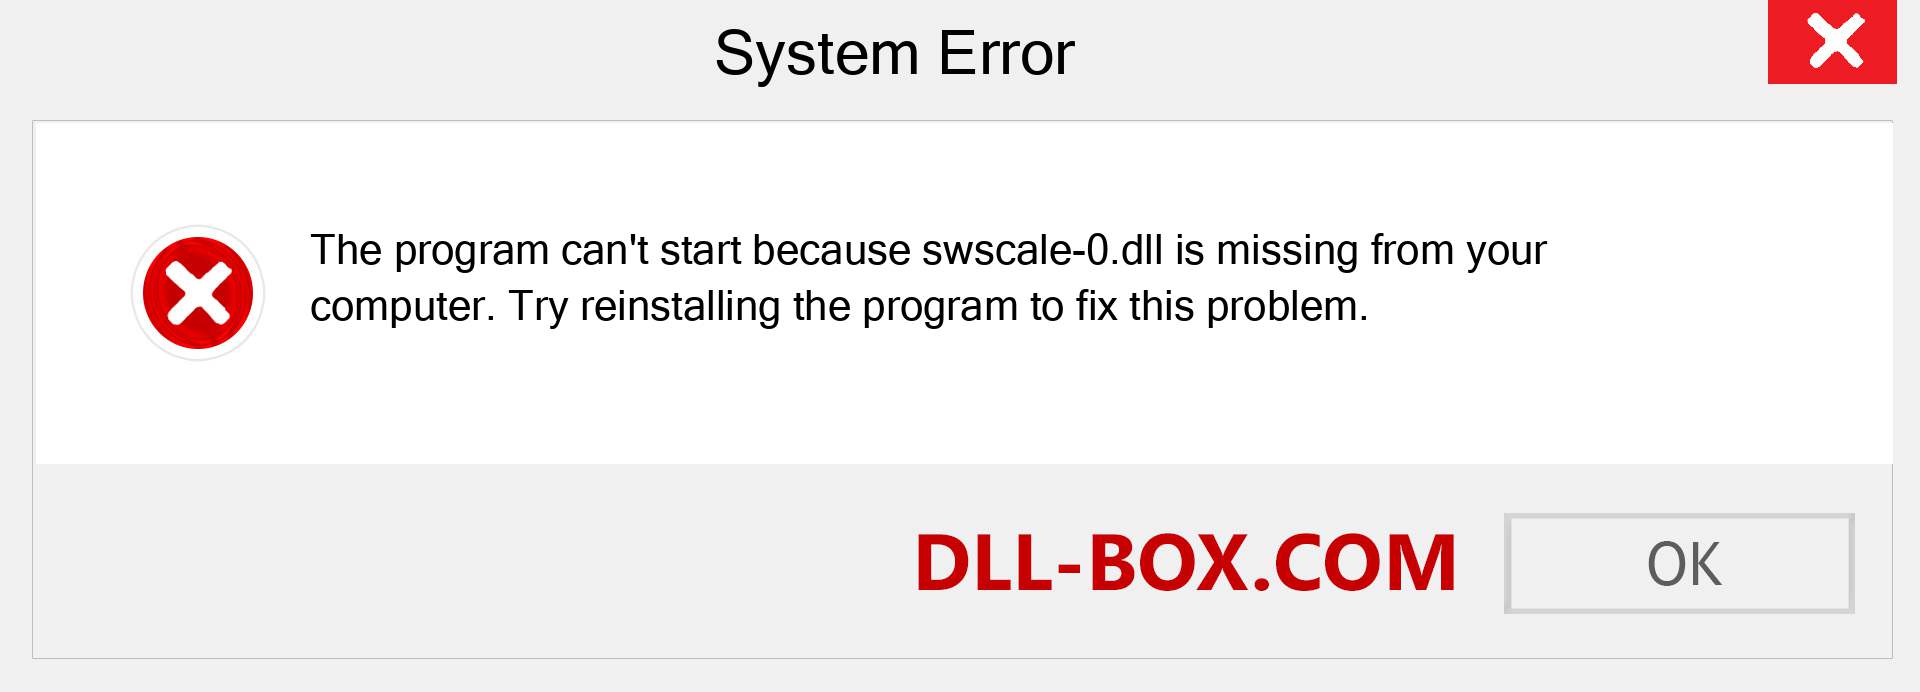  swscale-0.dll file is missing?. Download for Windows 7, 8, 10 - Fix  swscale-0 dll Missing Error on Windows, photos, images